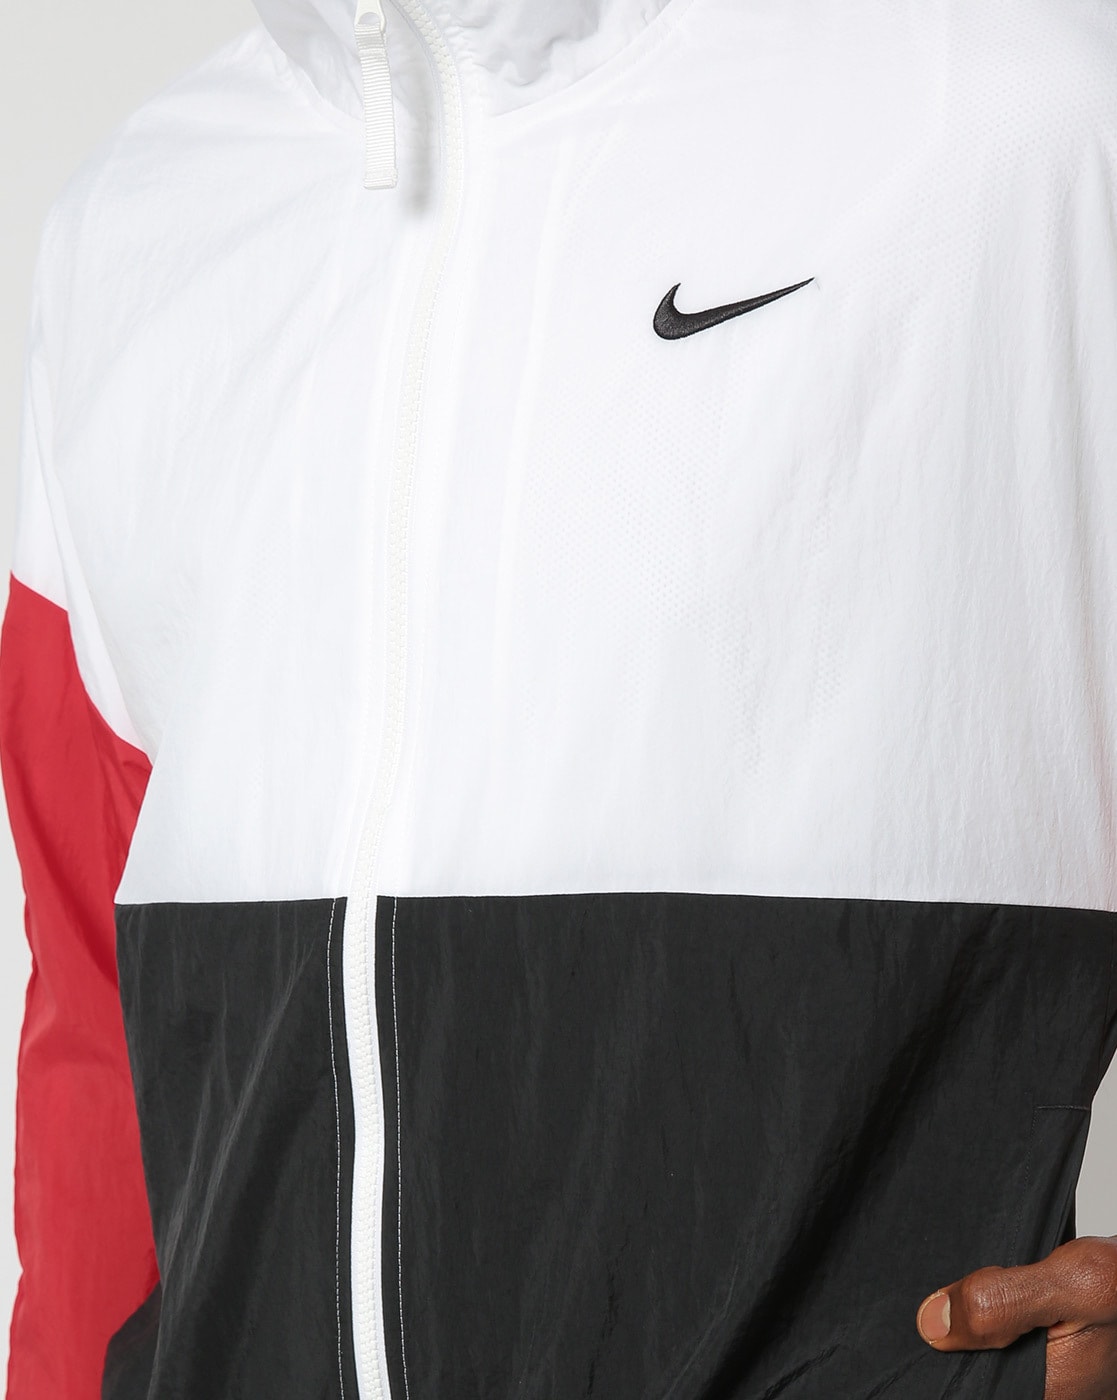 Nike Air Windbreaker Jacket white black grey NEW 727324-101 | Clothing,  Shoes & Accessories, Men's Clo… | Nike windrunner jacket, Nike clothes  mens, Mens activewear